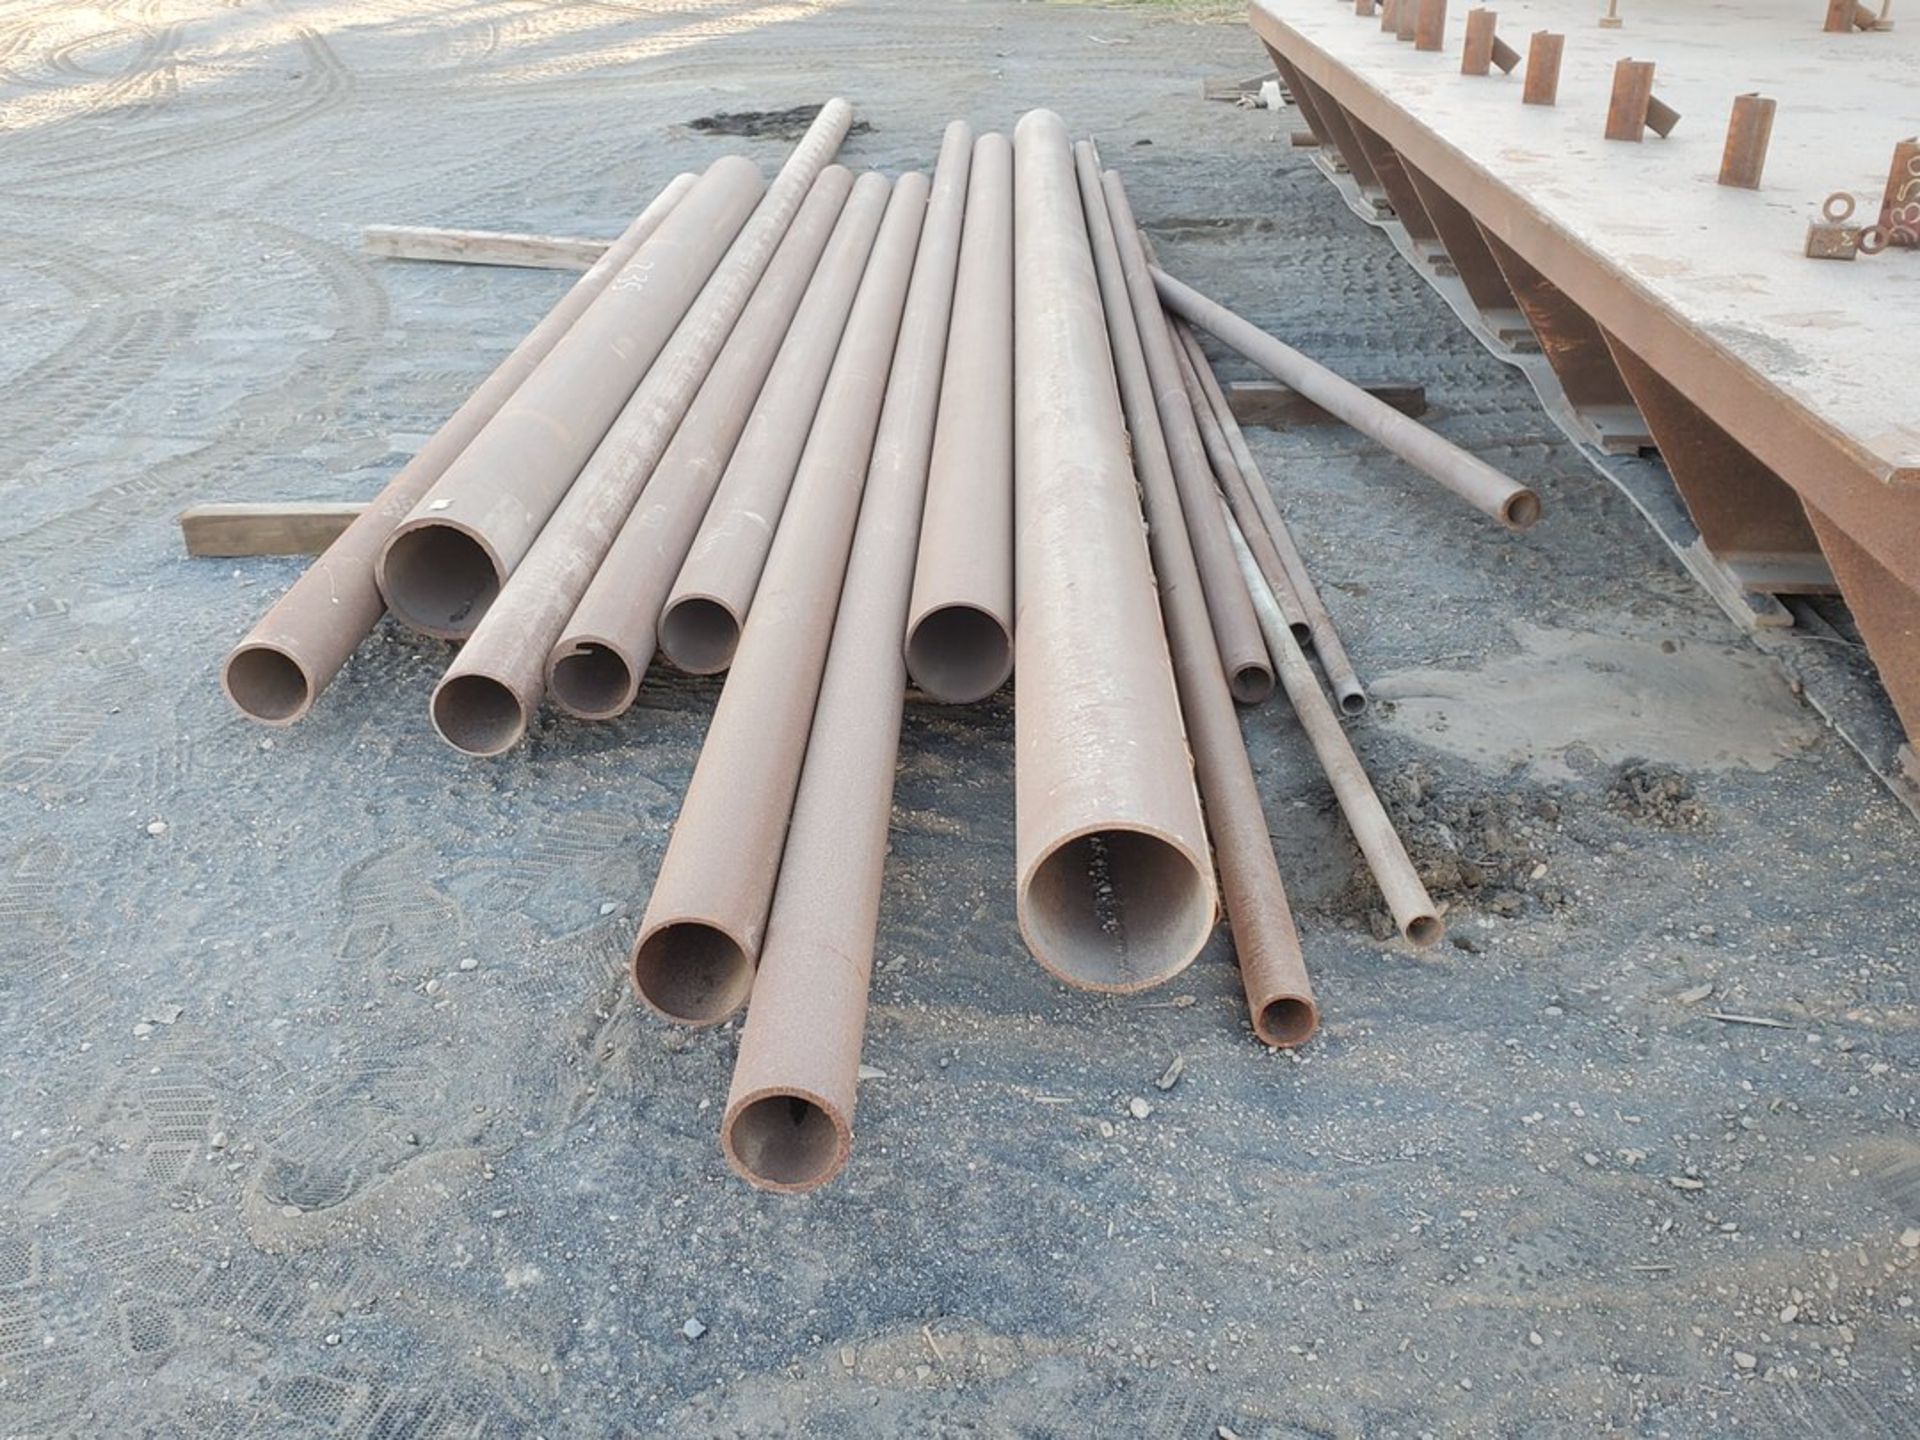 Assorted S/S Raw Matl. To Include But Not Limited To: Rebar, Pipe, Flat Bar, Angle, Sq. Tubing, Up - Image 4 of 14